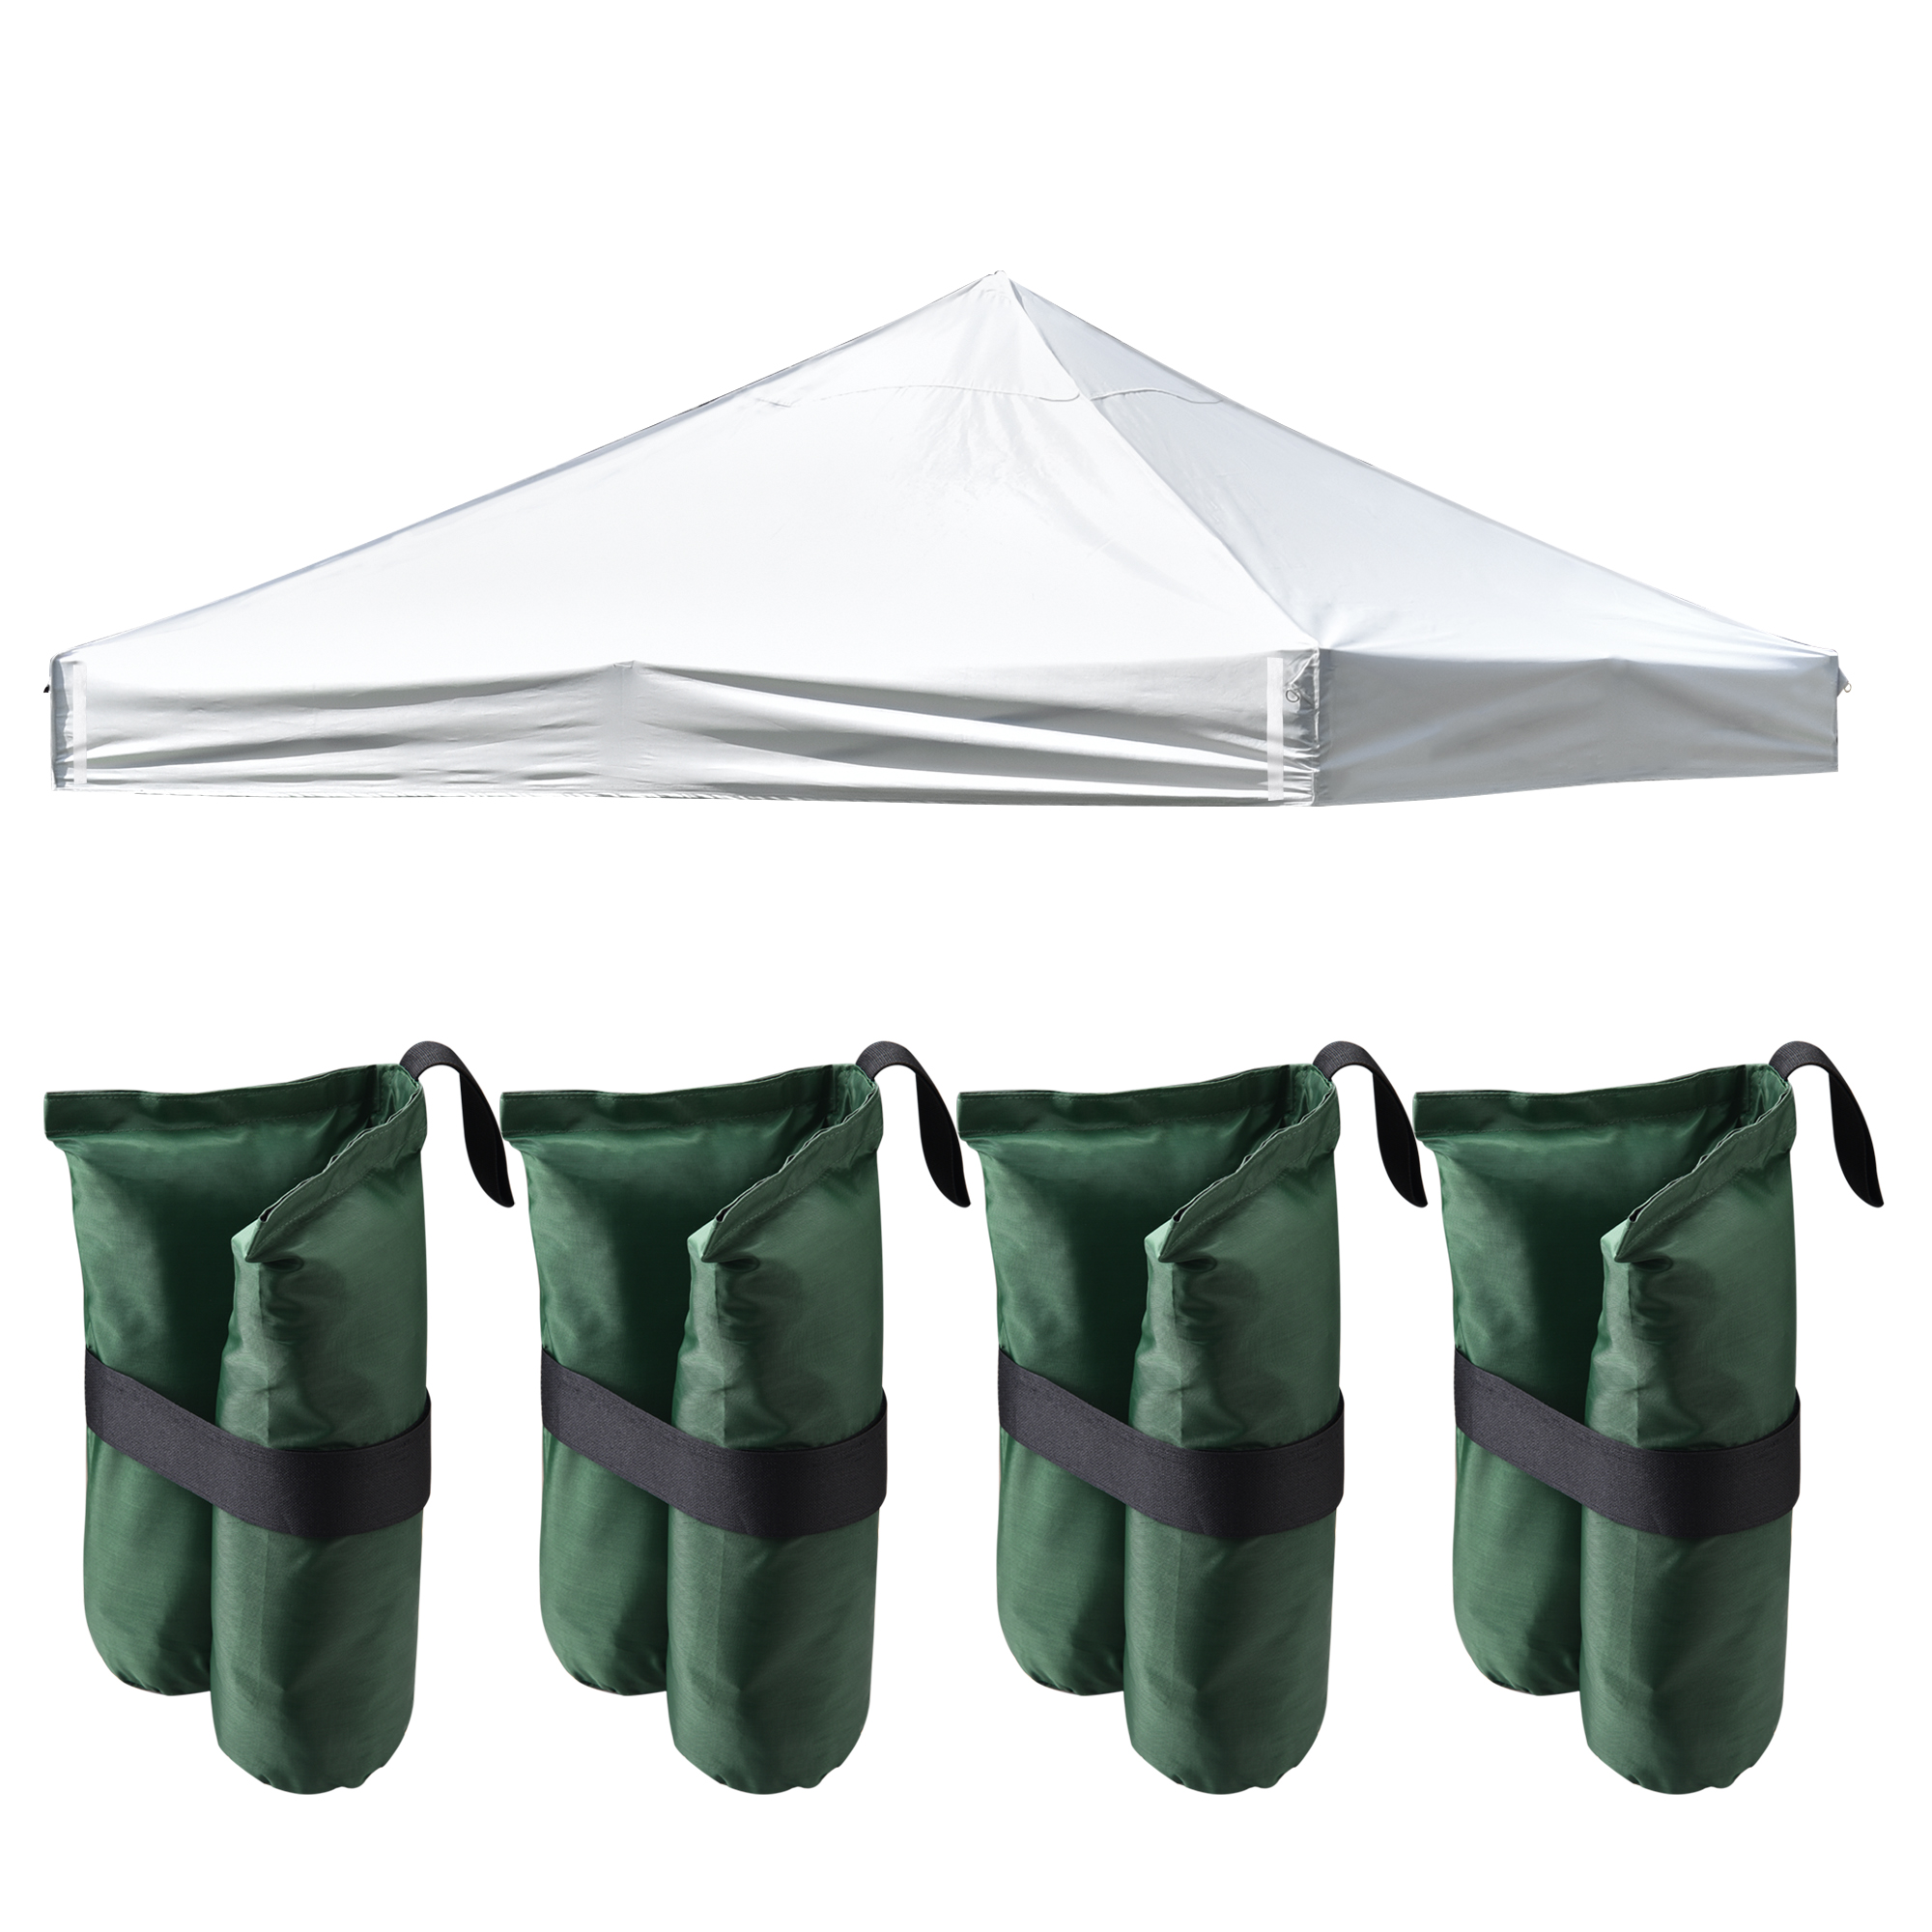 Yescom InstaHibit 9.6x9.6 Ft Pop up Canopy Top with 4 Sand Bags Outdoor Yard Beach